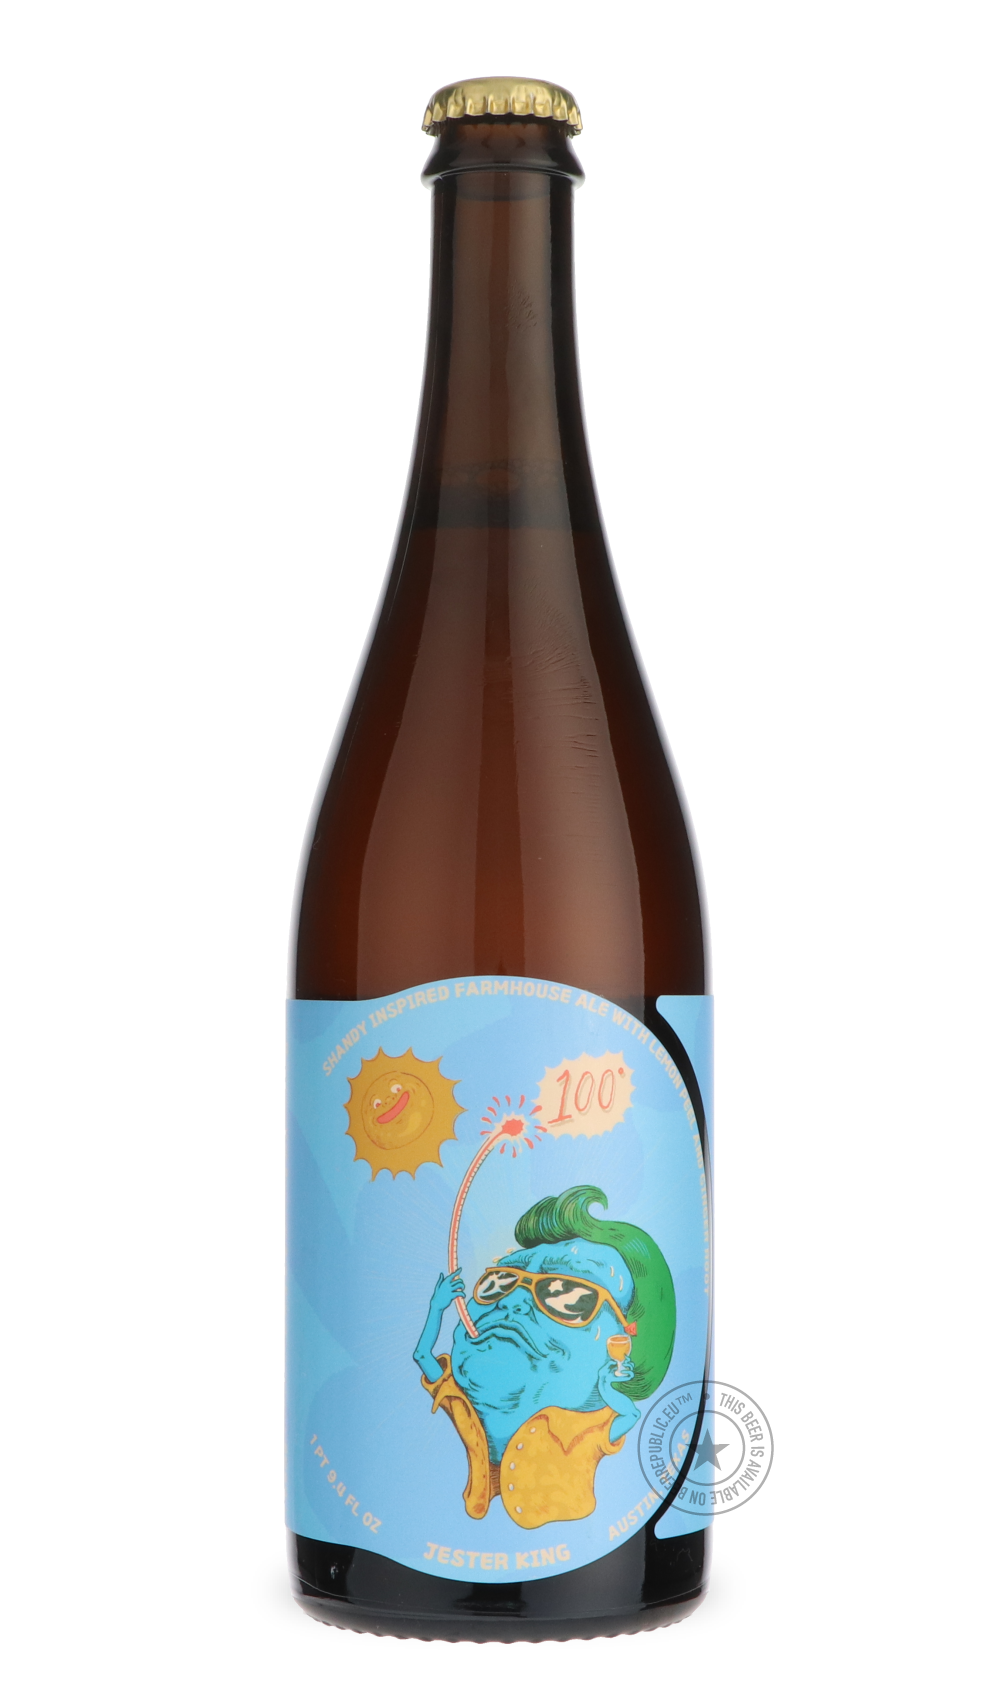 -Jester King- 100°-Sour / Wild & Fruity- Only @ Beer Republic - The best online beer store for American & Canadian craft beer - Buy beer online from the USA and Canada - Bier online kopen - Amerikaans bier kopen - Craft beer store - Craft beer kopen - Amerikanisch bier kaufen - Bier online kaufen - Acheter biere online - IPA - Stout - Porter - New England IPA - Hazy IPA - Imperial Stout - Barrel Aged - Barrel Aged Imperial Stout - Brown - Dark beer - Blond - Blonde - Pilsner - Lager - Wheat - Weizen - Amber